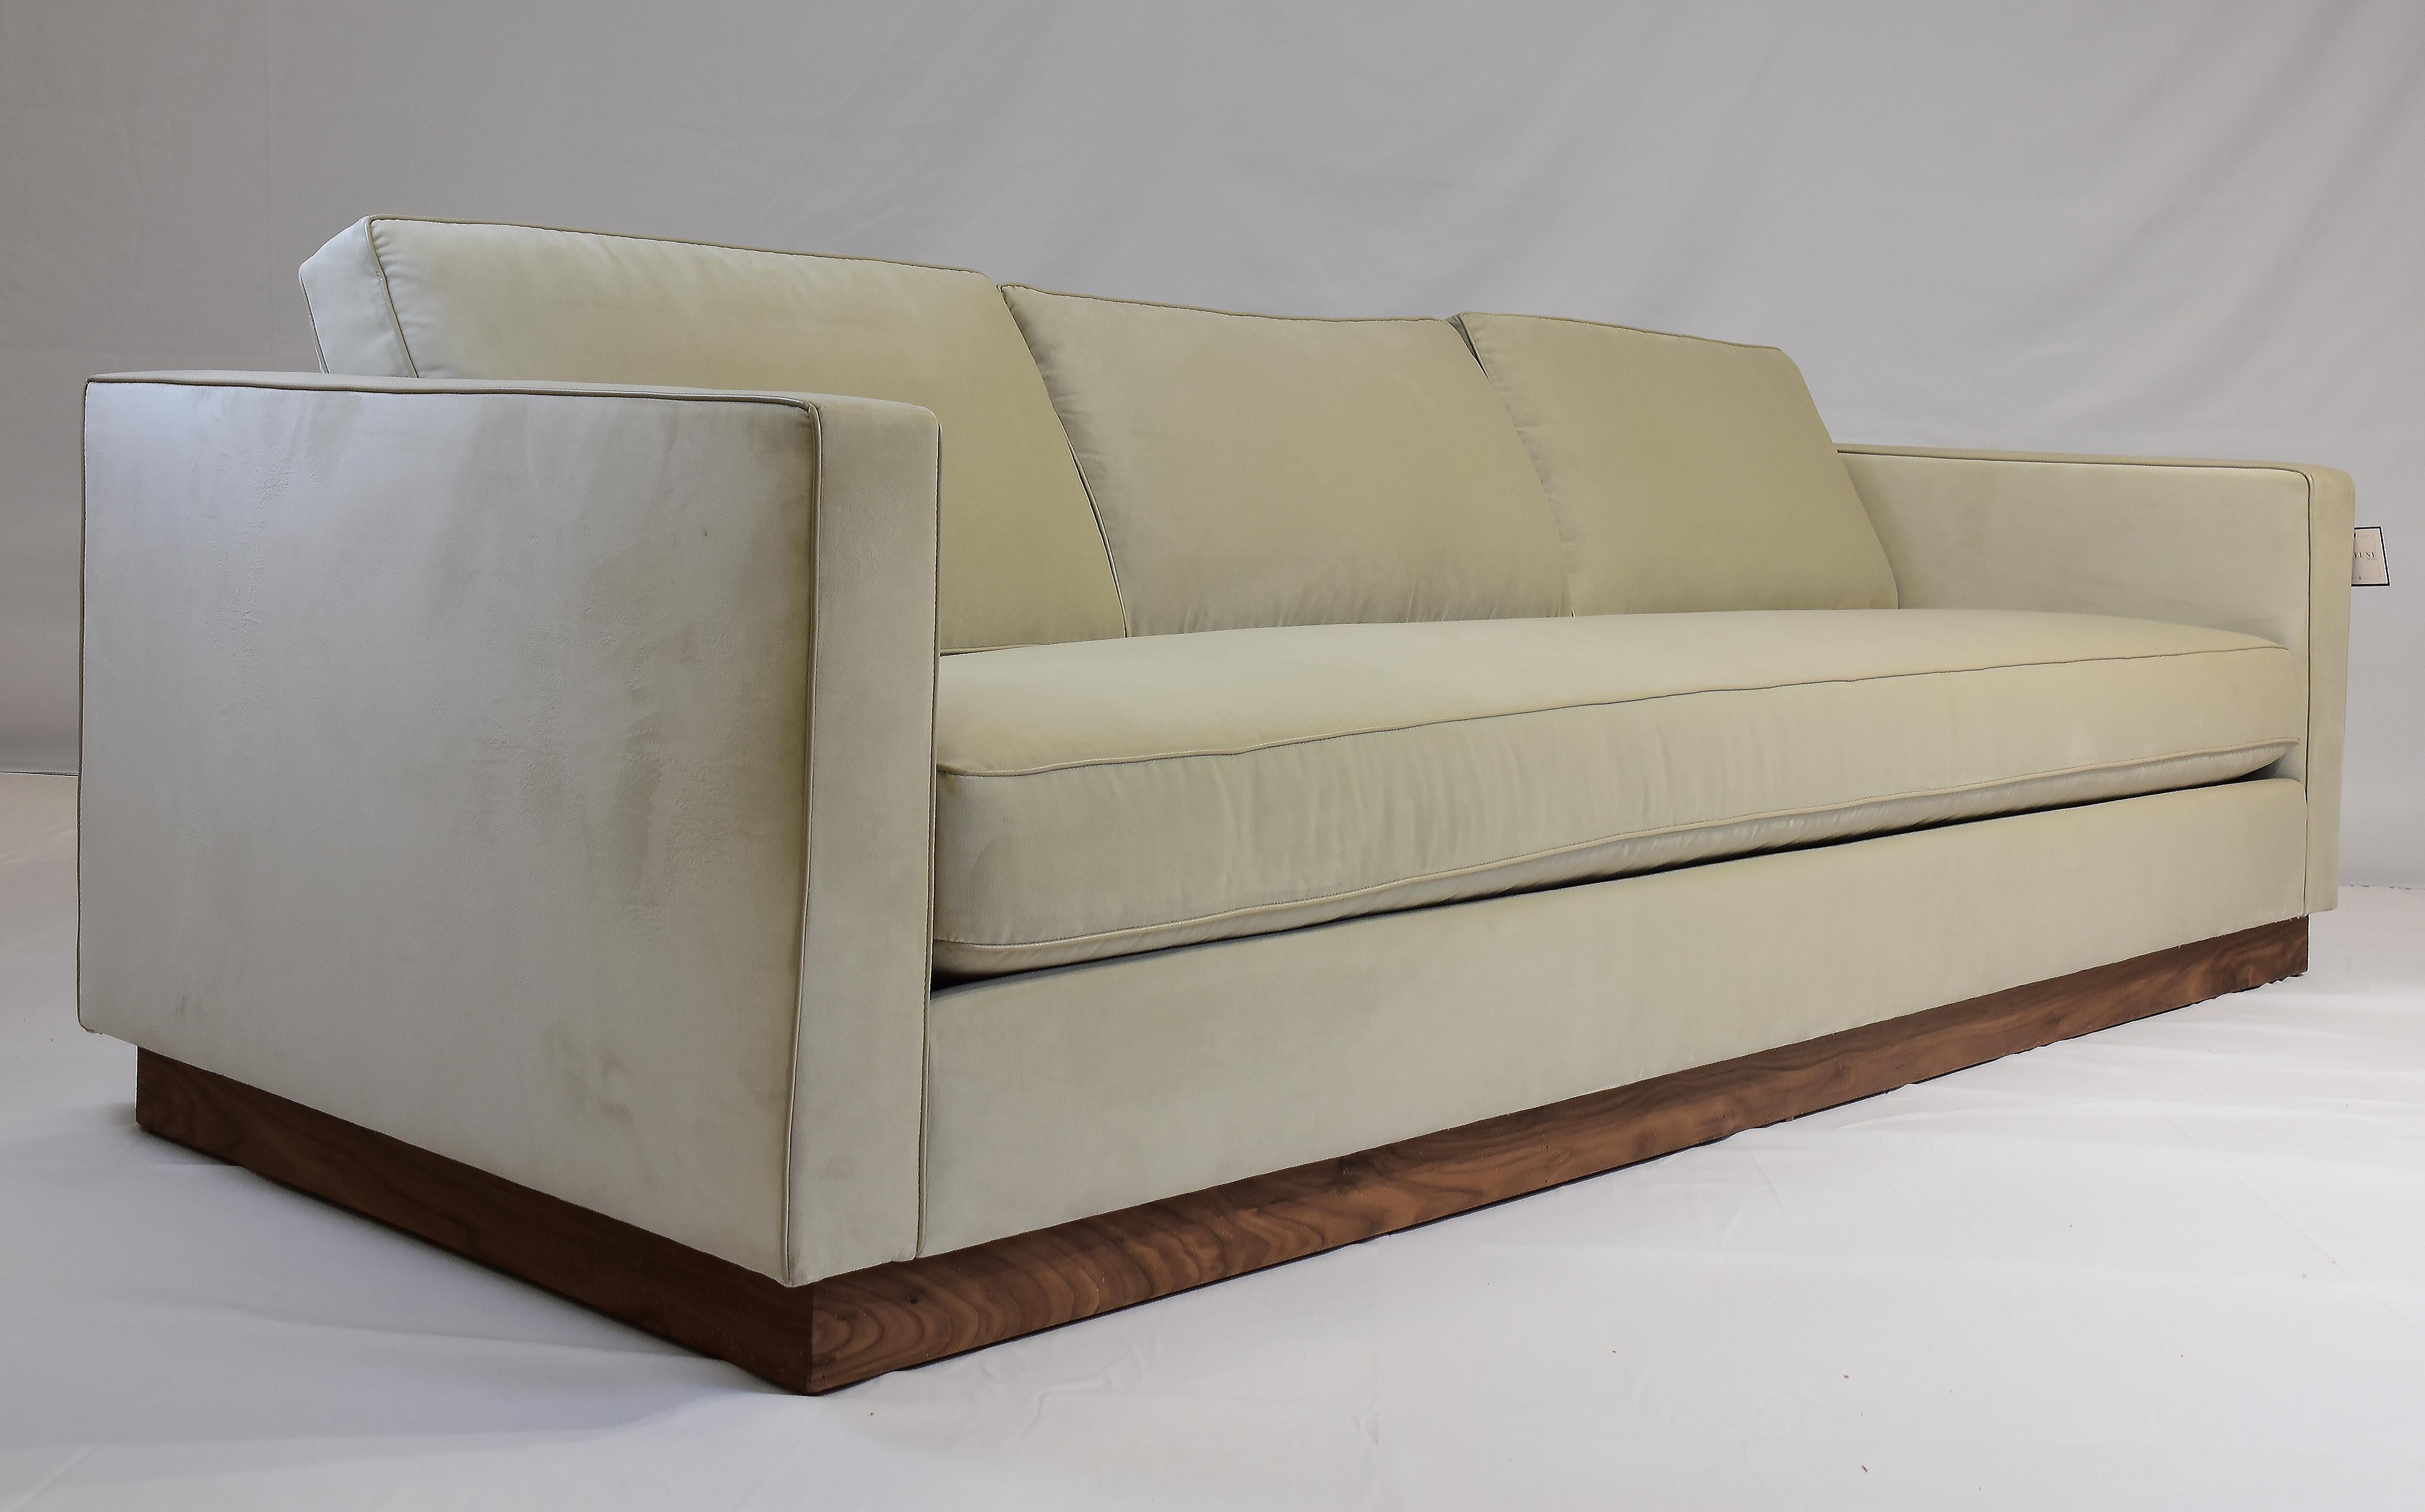 Le Jeune Upholstery Shaker 3 Seat Sofa Showroom Model

Offered for sale is a SHAKER S9.923 generous 3-seat sofa showroom model. The Shaker sofa is a modern boxed arm sofa with medium-scaled proportions for relaxed seating. It has a solid Walnut wood